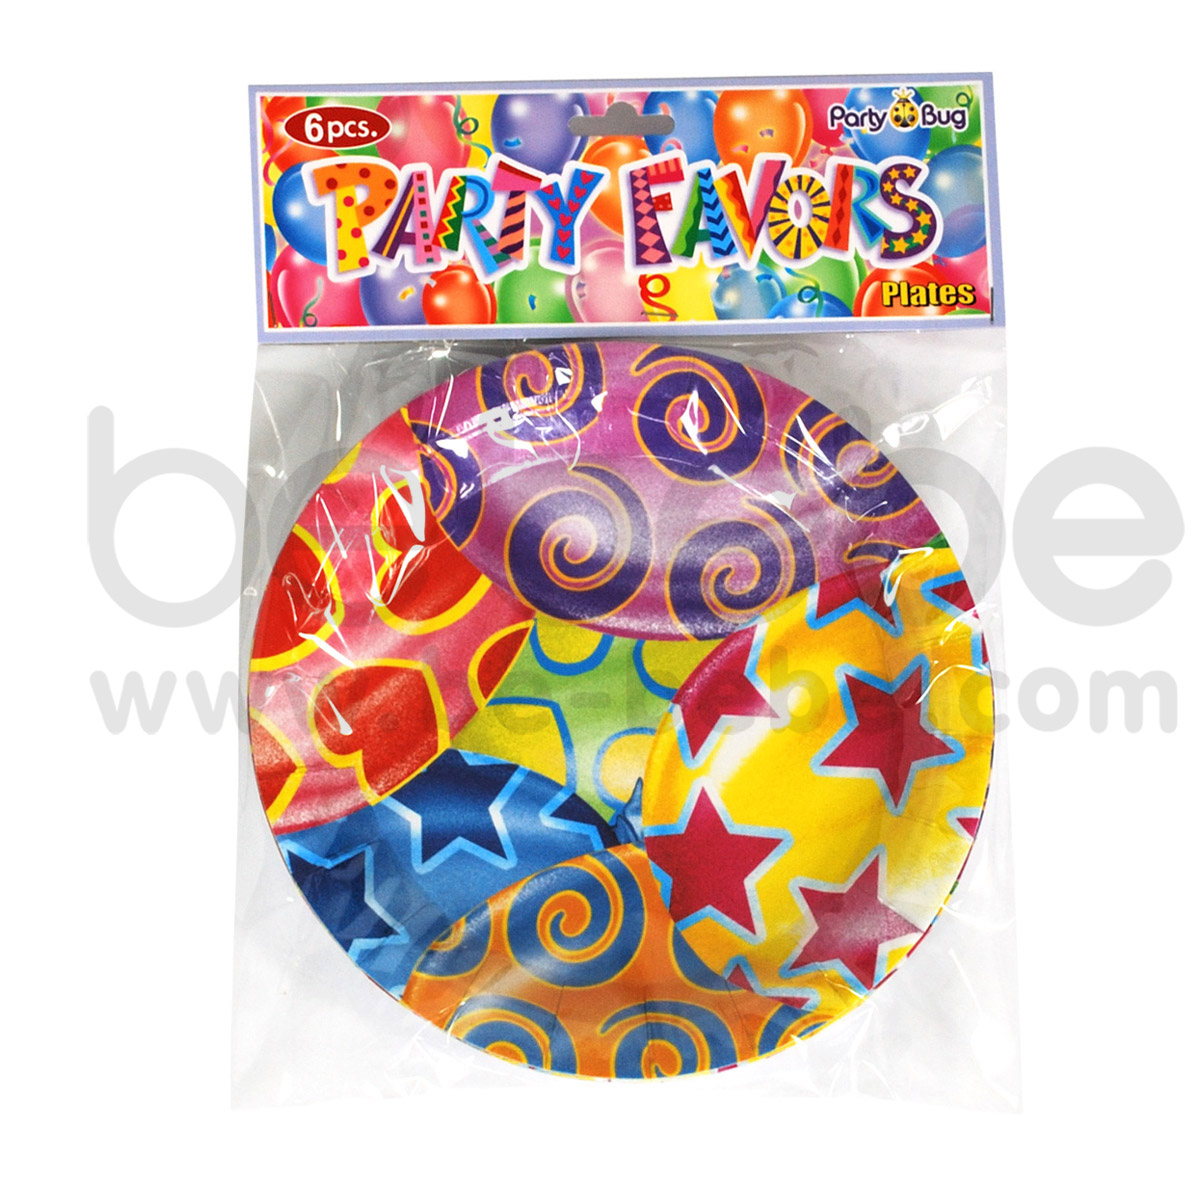 PARTY BUG : Paper plate 7 inch., 6 Packs